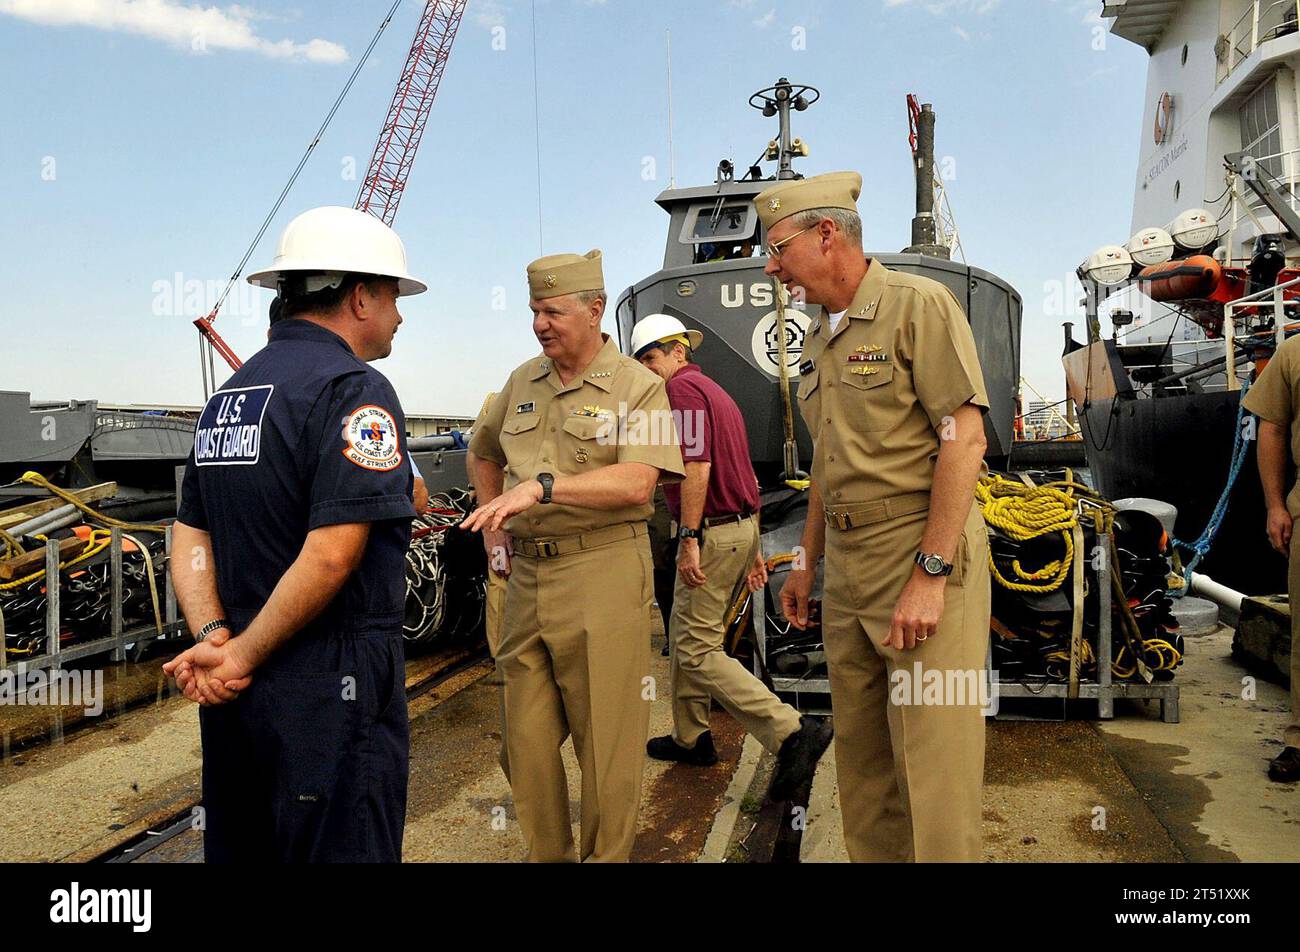 1005048273J-095 GULFPORT, Miss. (May 4, 2010) Chief of Naval Operations (CNO) Adm. Gary Roughead, left, and Vice Adm. Kevin M. McCoy, commander of Naval Sea Systems Command, visit the Port of Gulfport where Naval Sea Systems Command environmental recovery equipment is being staged. Naval Sea Systems Command is assisting in cleanup efforts from the Deepwater Horizon oil spill. Deepwater Horizon was an ultra-deepwater oil rig that sank April 22, causing a massive oil spill threatening the U.S. Gulf Coast. Navy Stock Photo